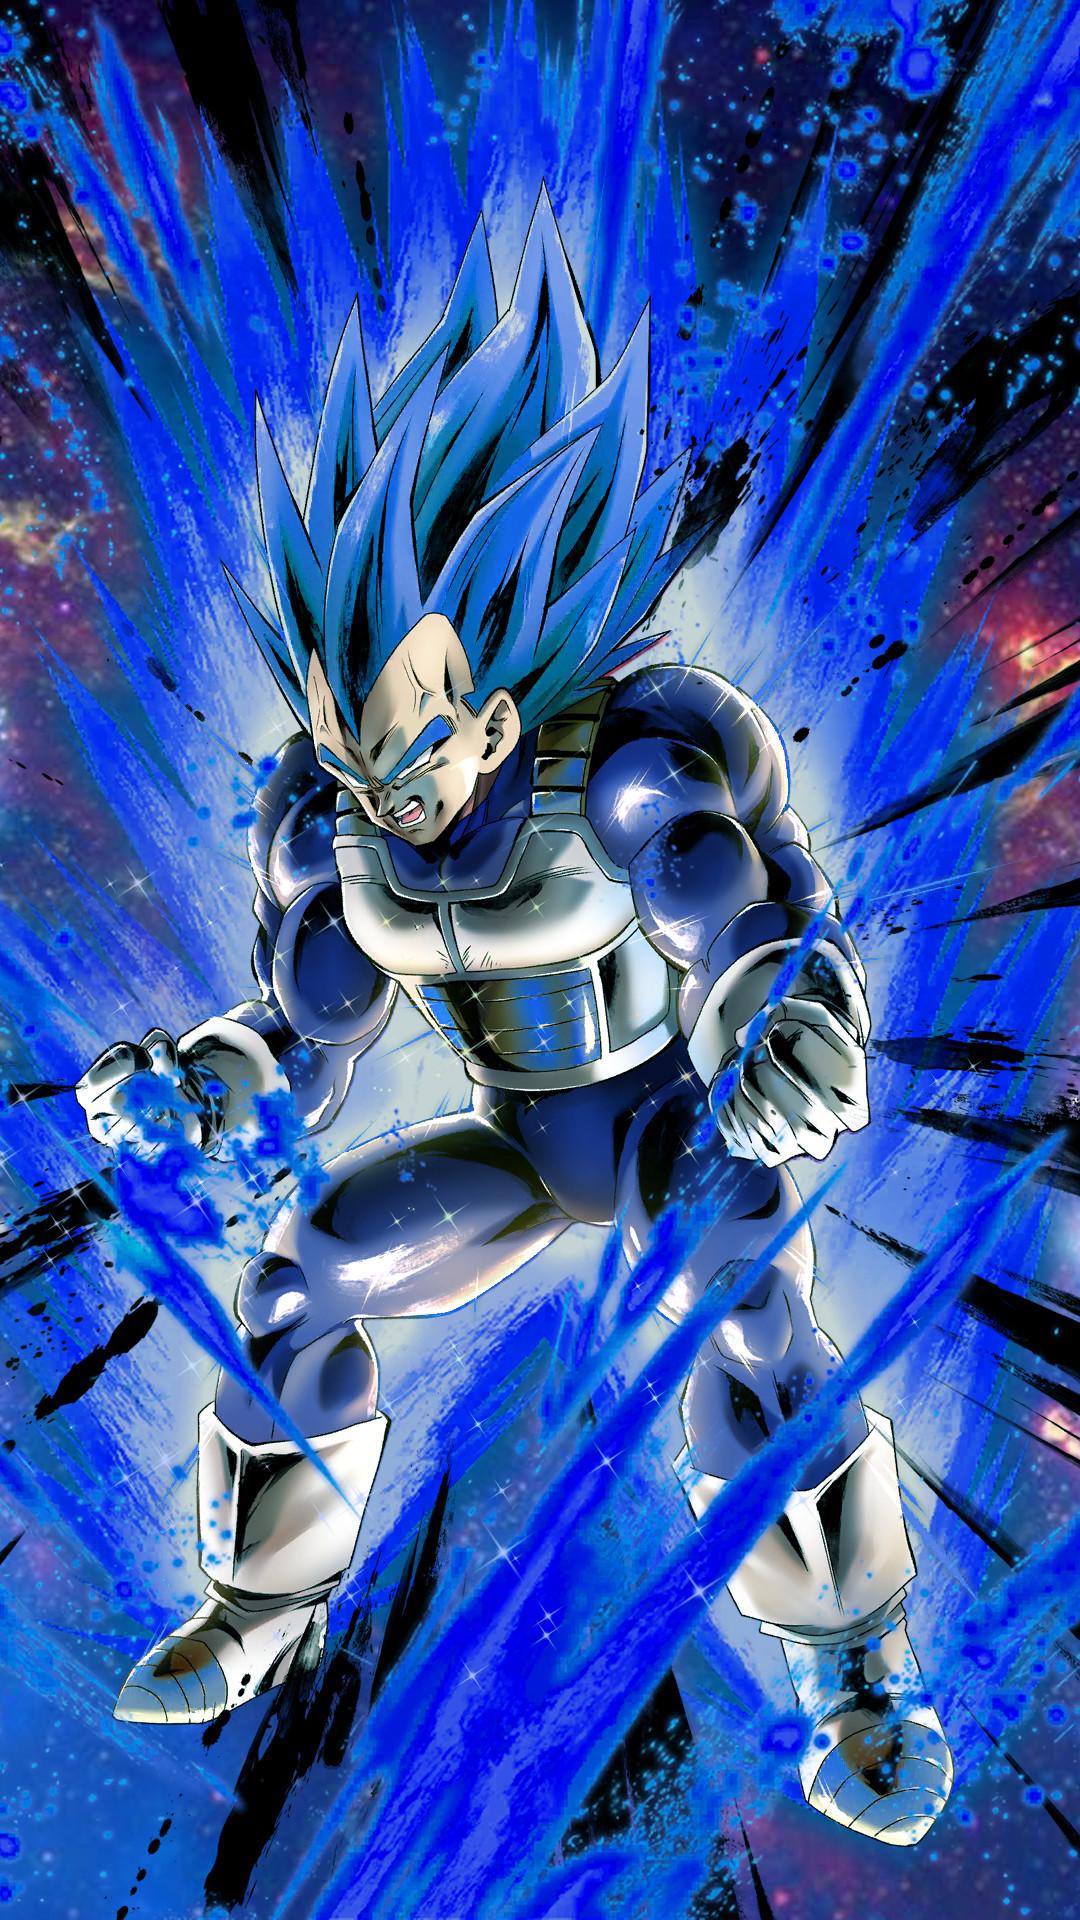 1080 x 1920 · jpeg - Vegeta Wallpaper for Android (76+ images)